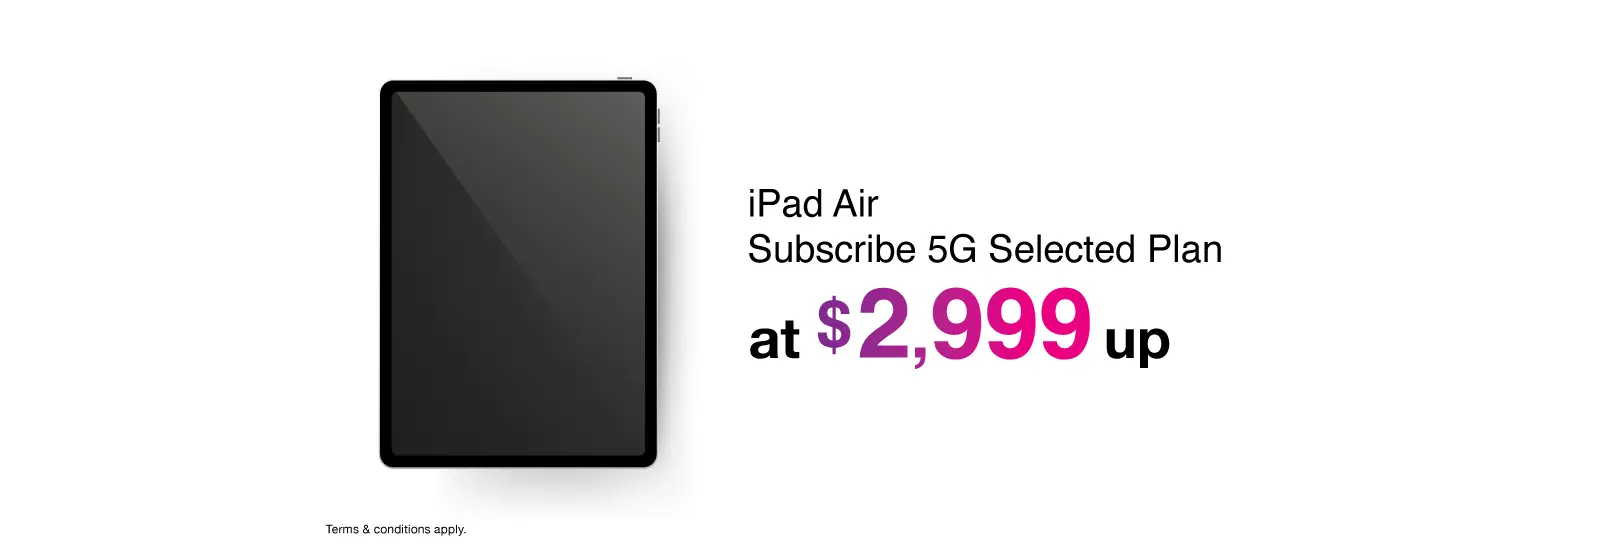 iPad Air 5G Selected Plan from half price.